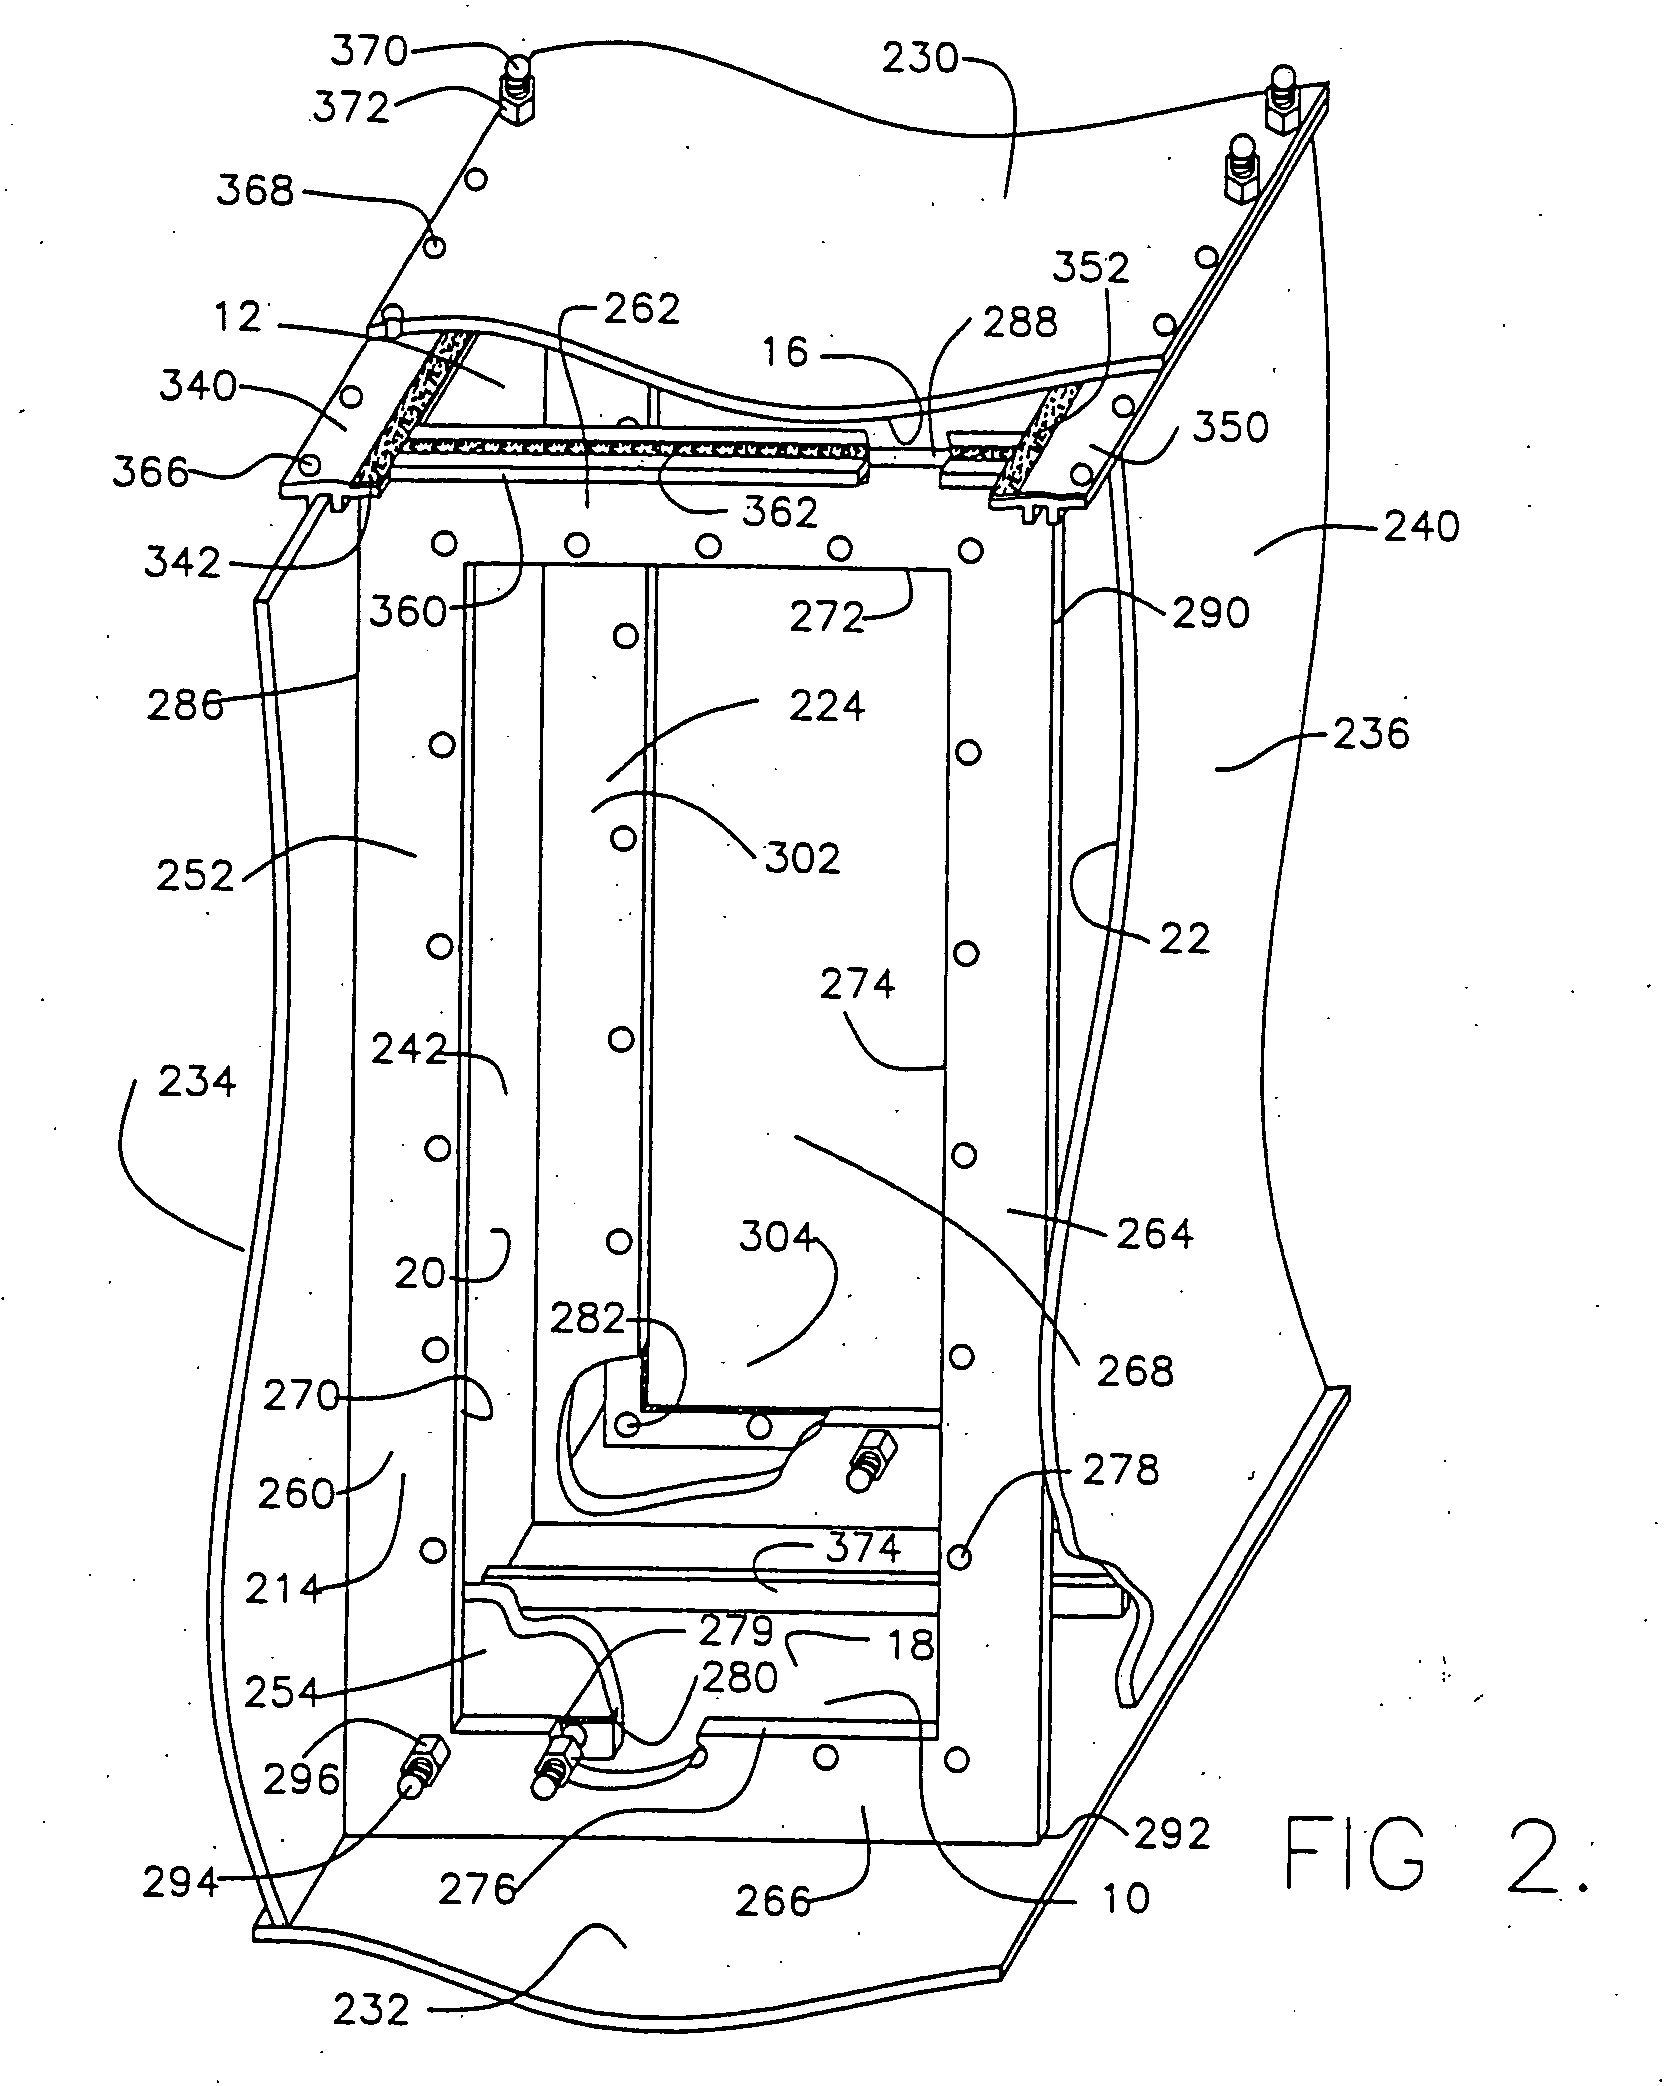 Structure for multiple-effect distillation using tubes or plates